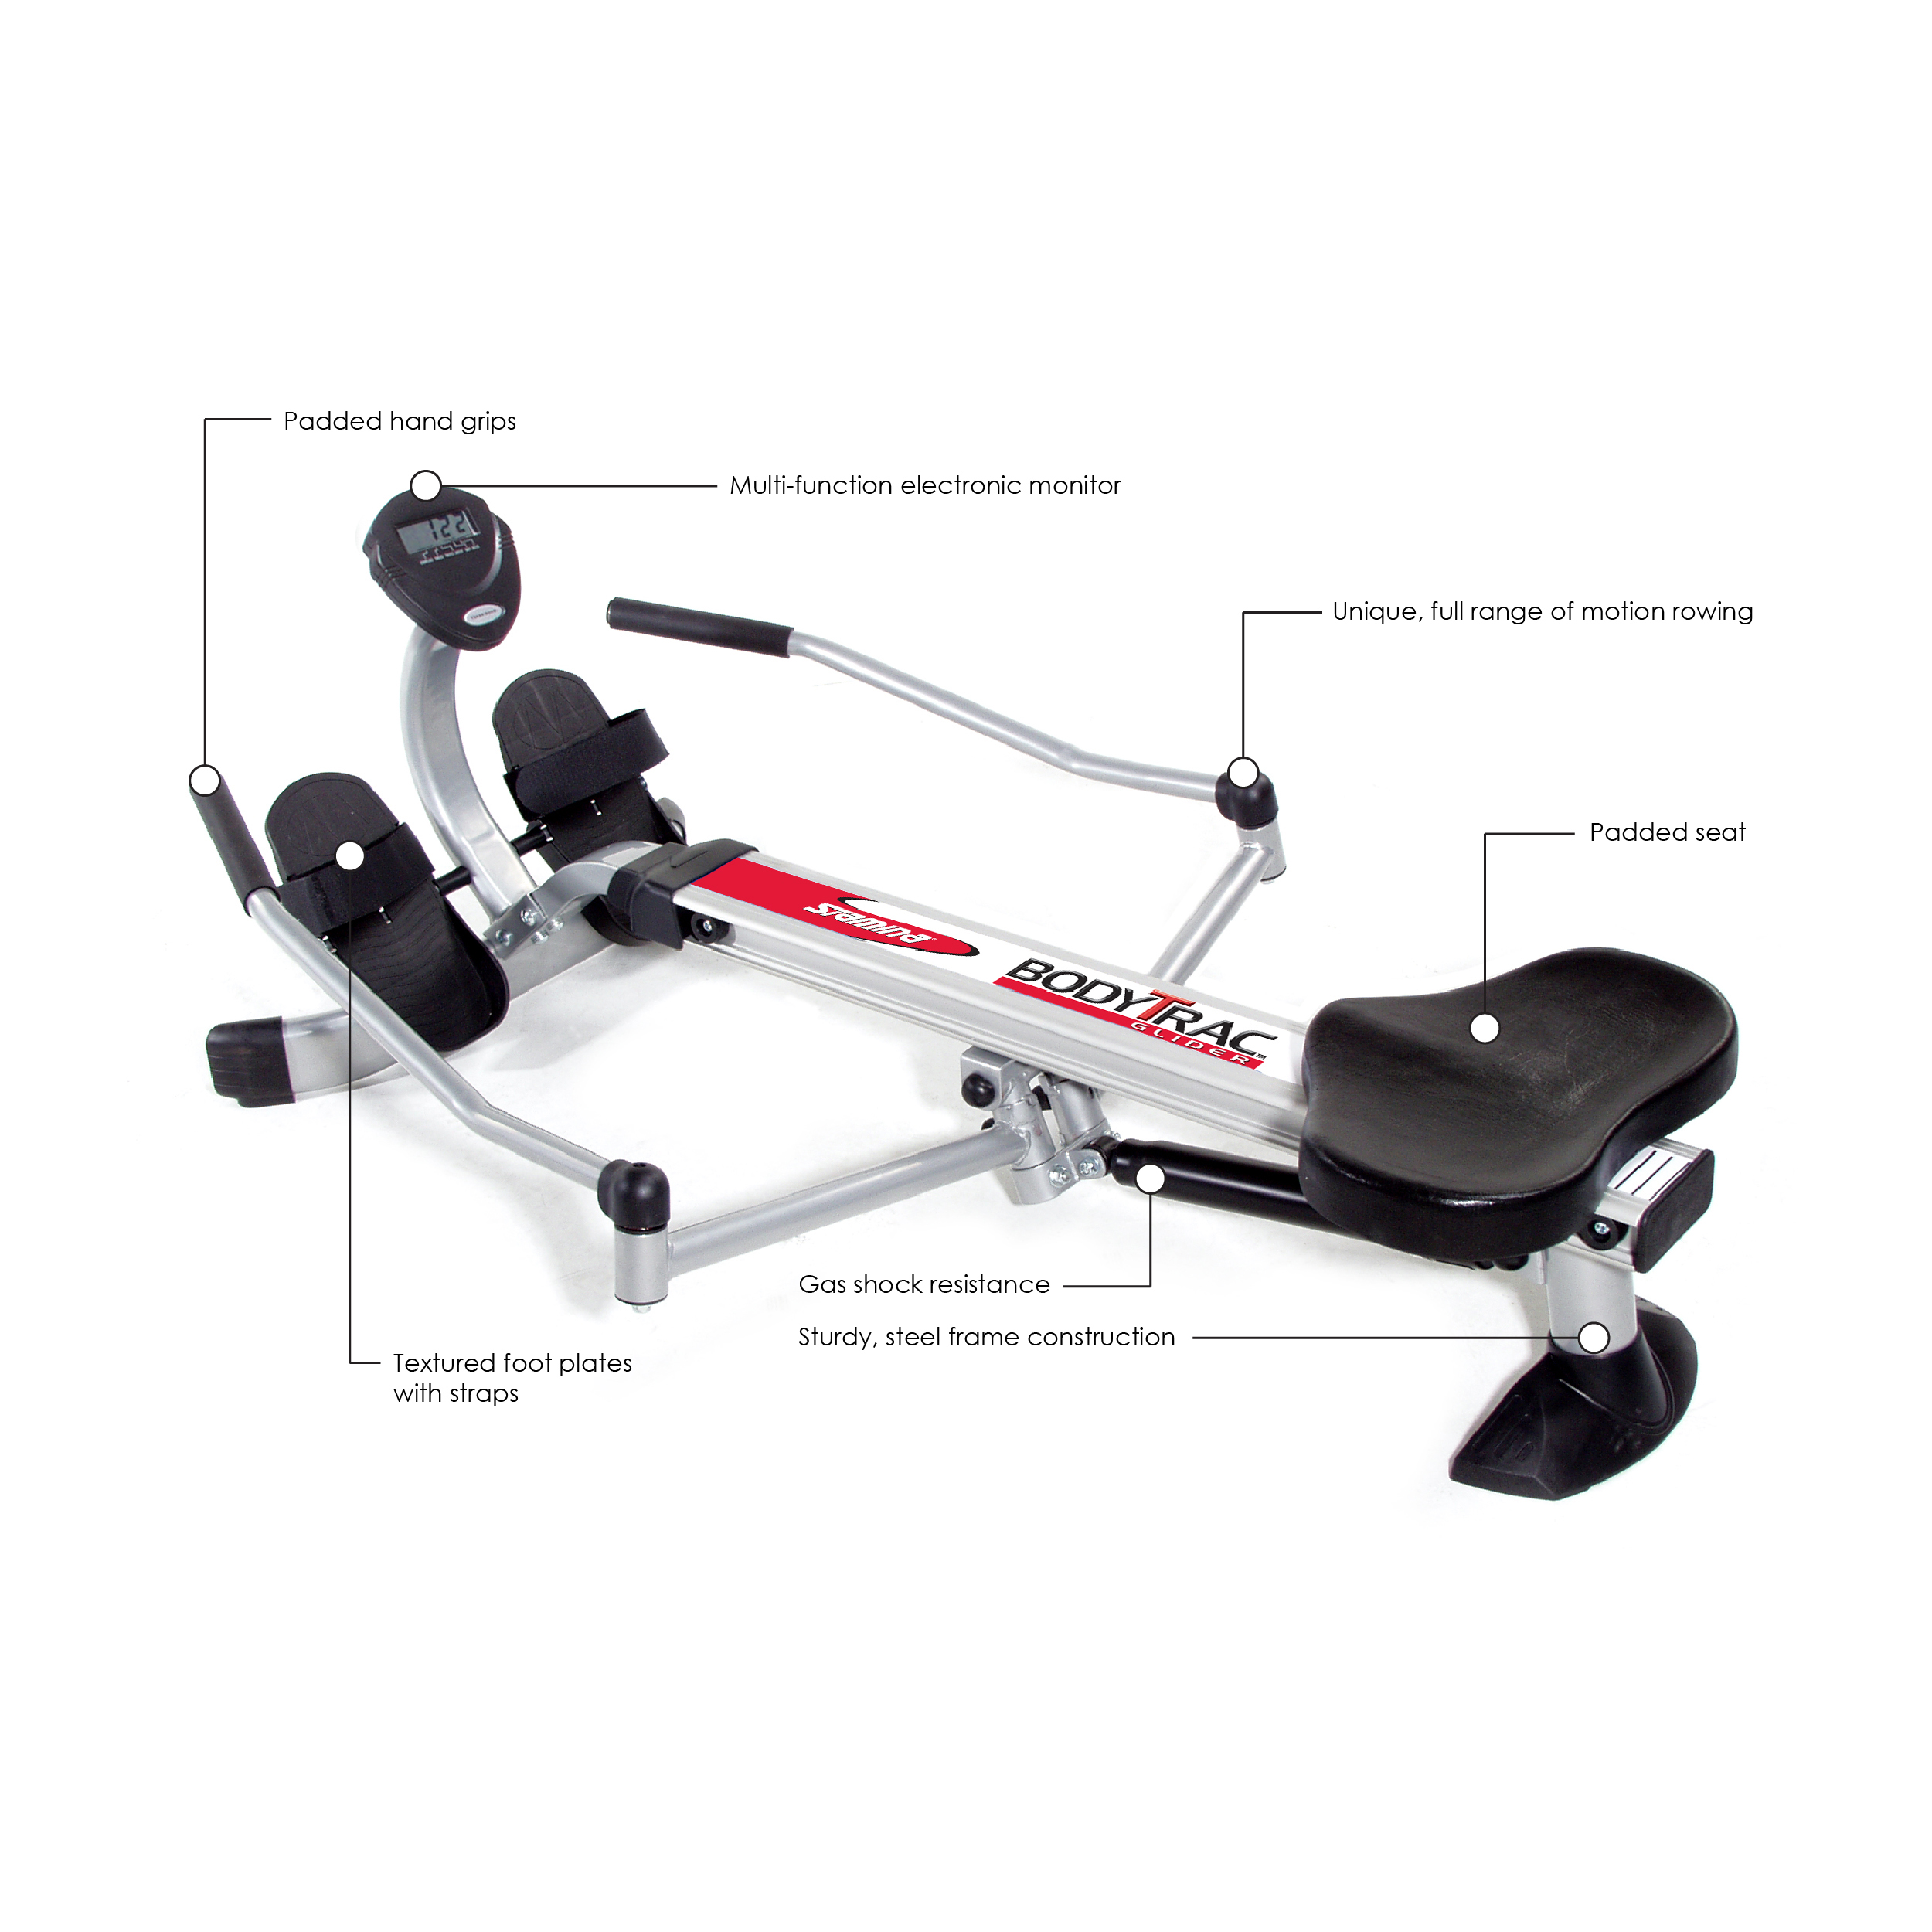 Details about  / Livebest Hydraulic Rowing Machine Full Body Stamina Exercise Power